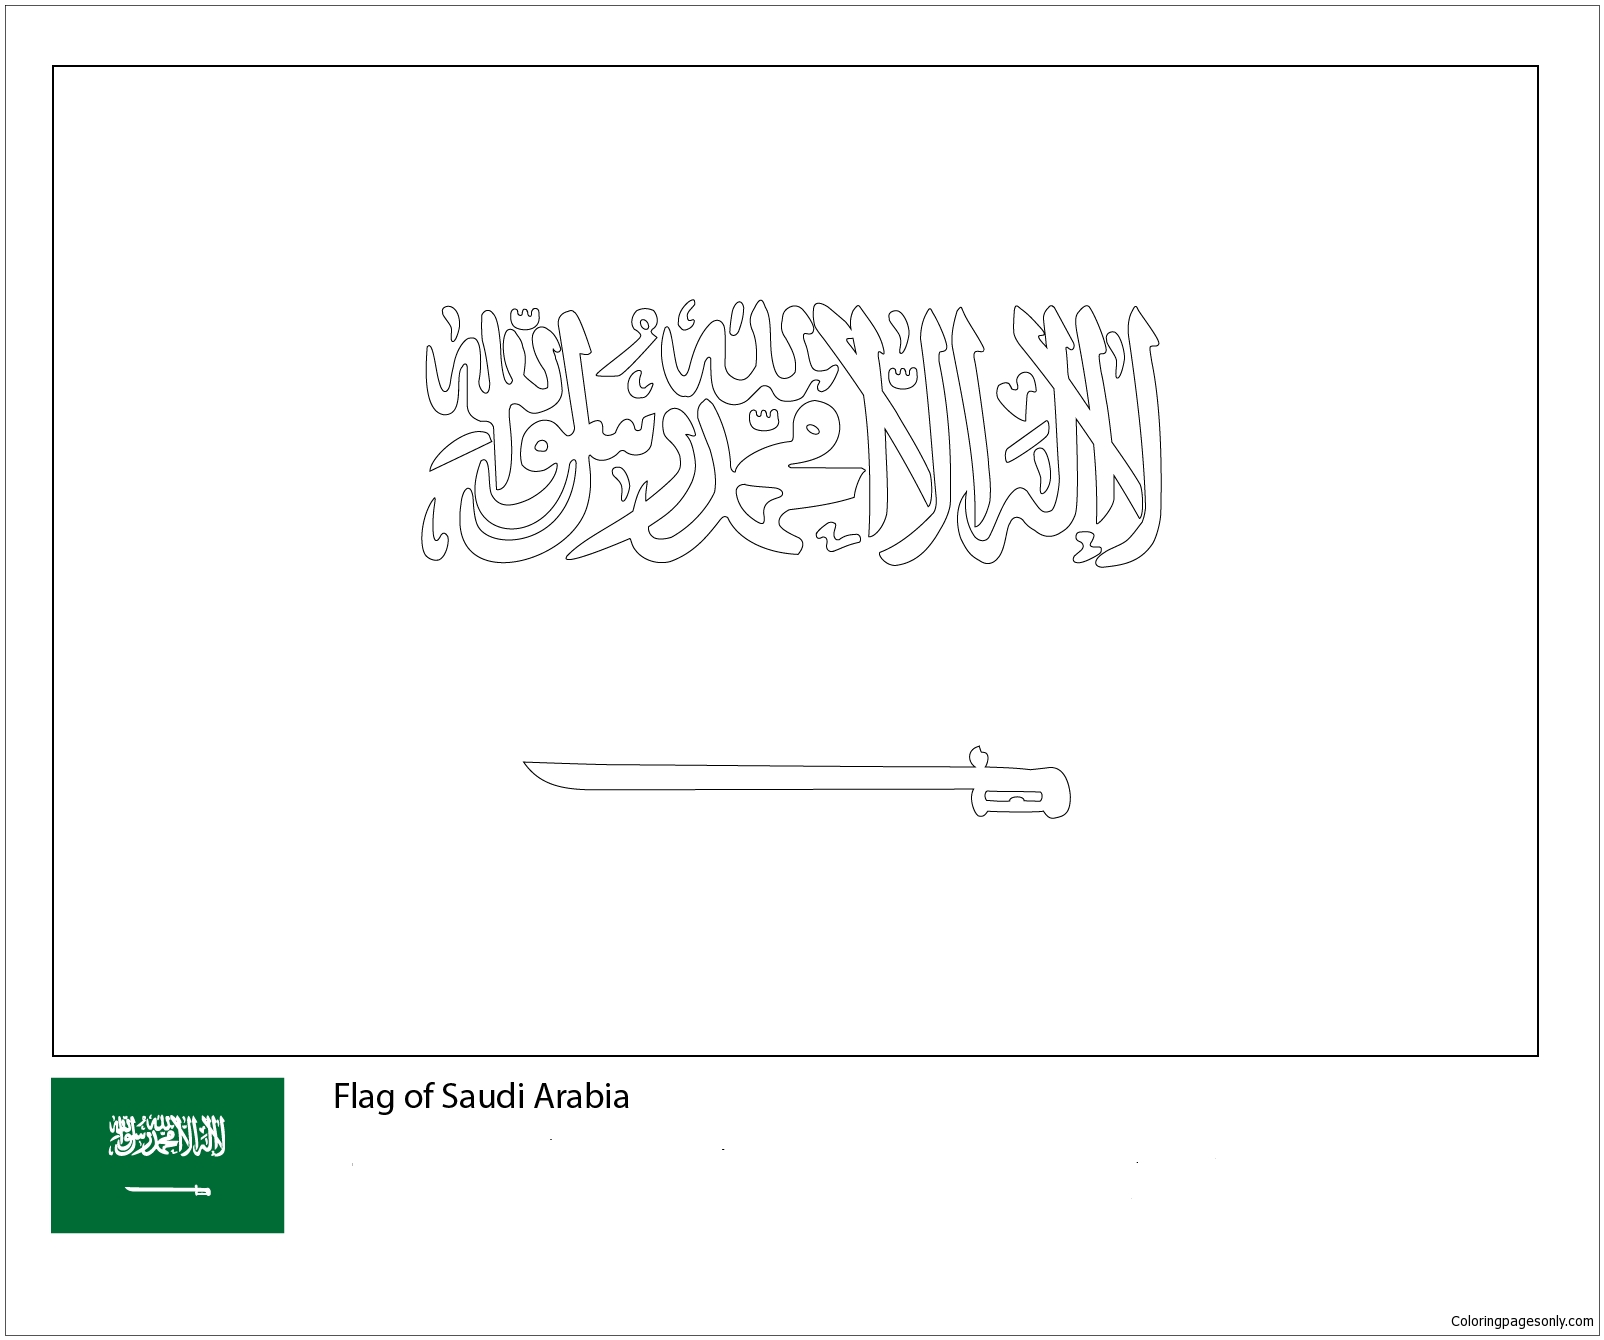 Flag of Saudi Arabia-World Cup 2018 Coloring Pages